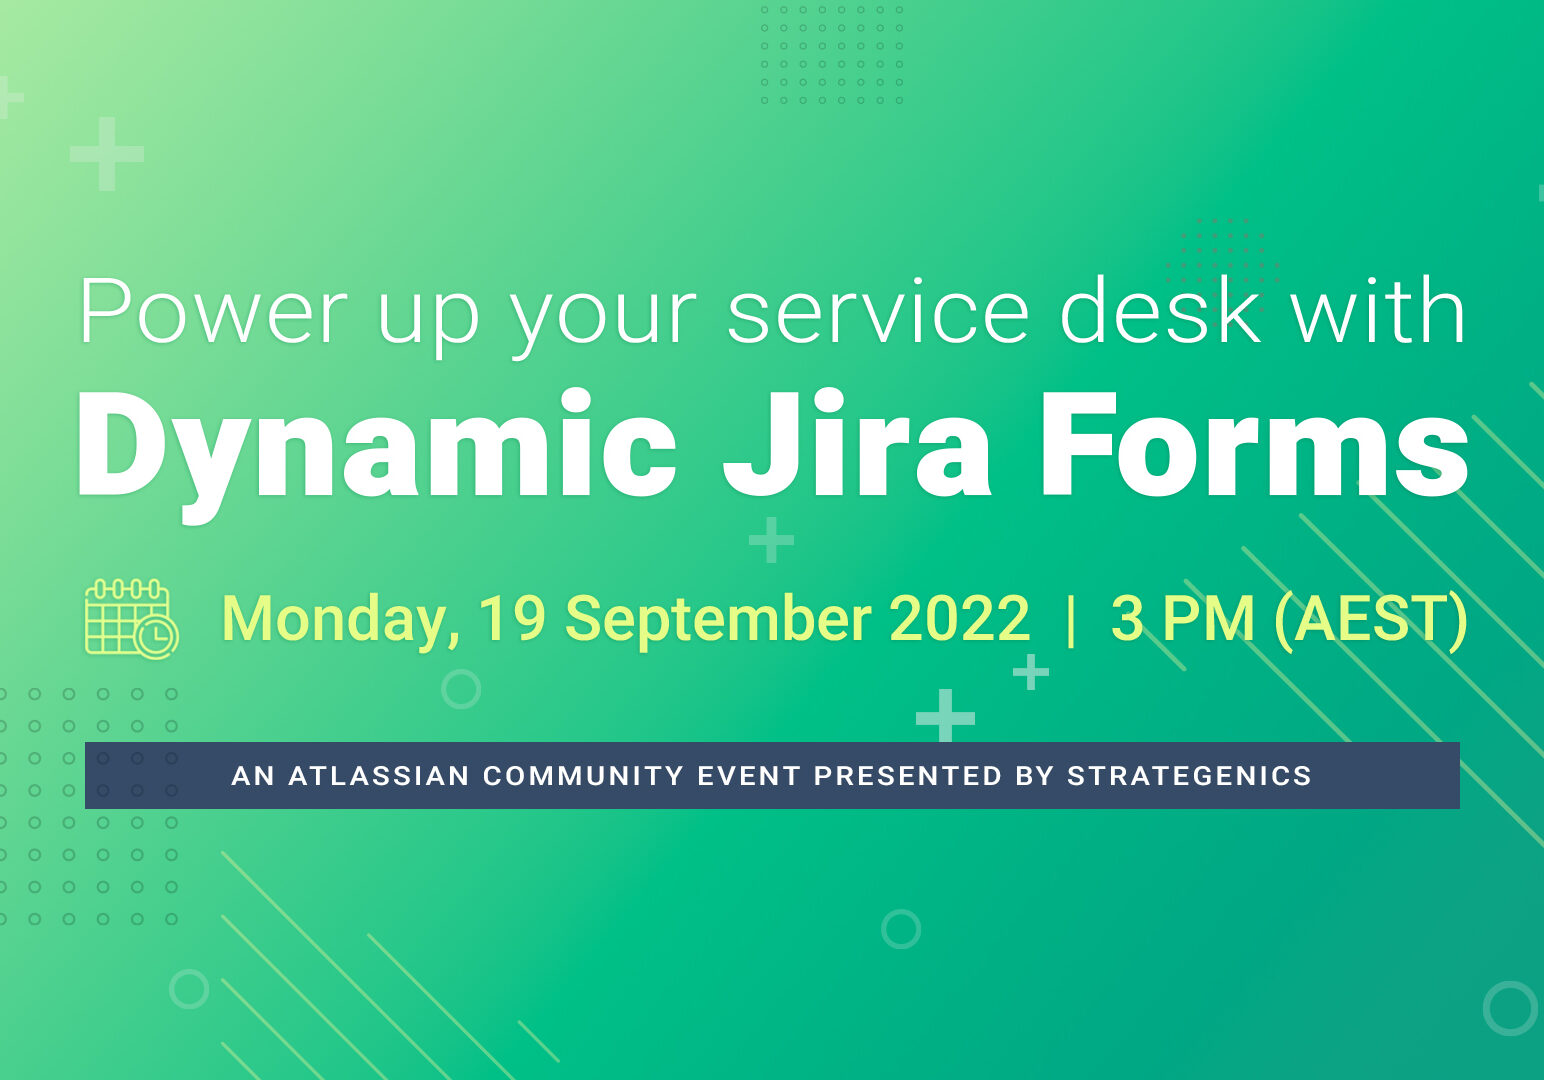 Atlassian Community Event - Power up your service desk with dynamic Jira forms